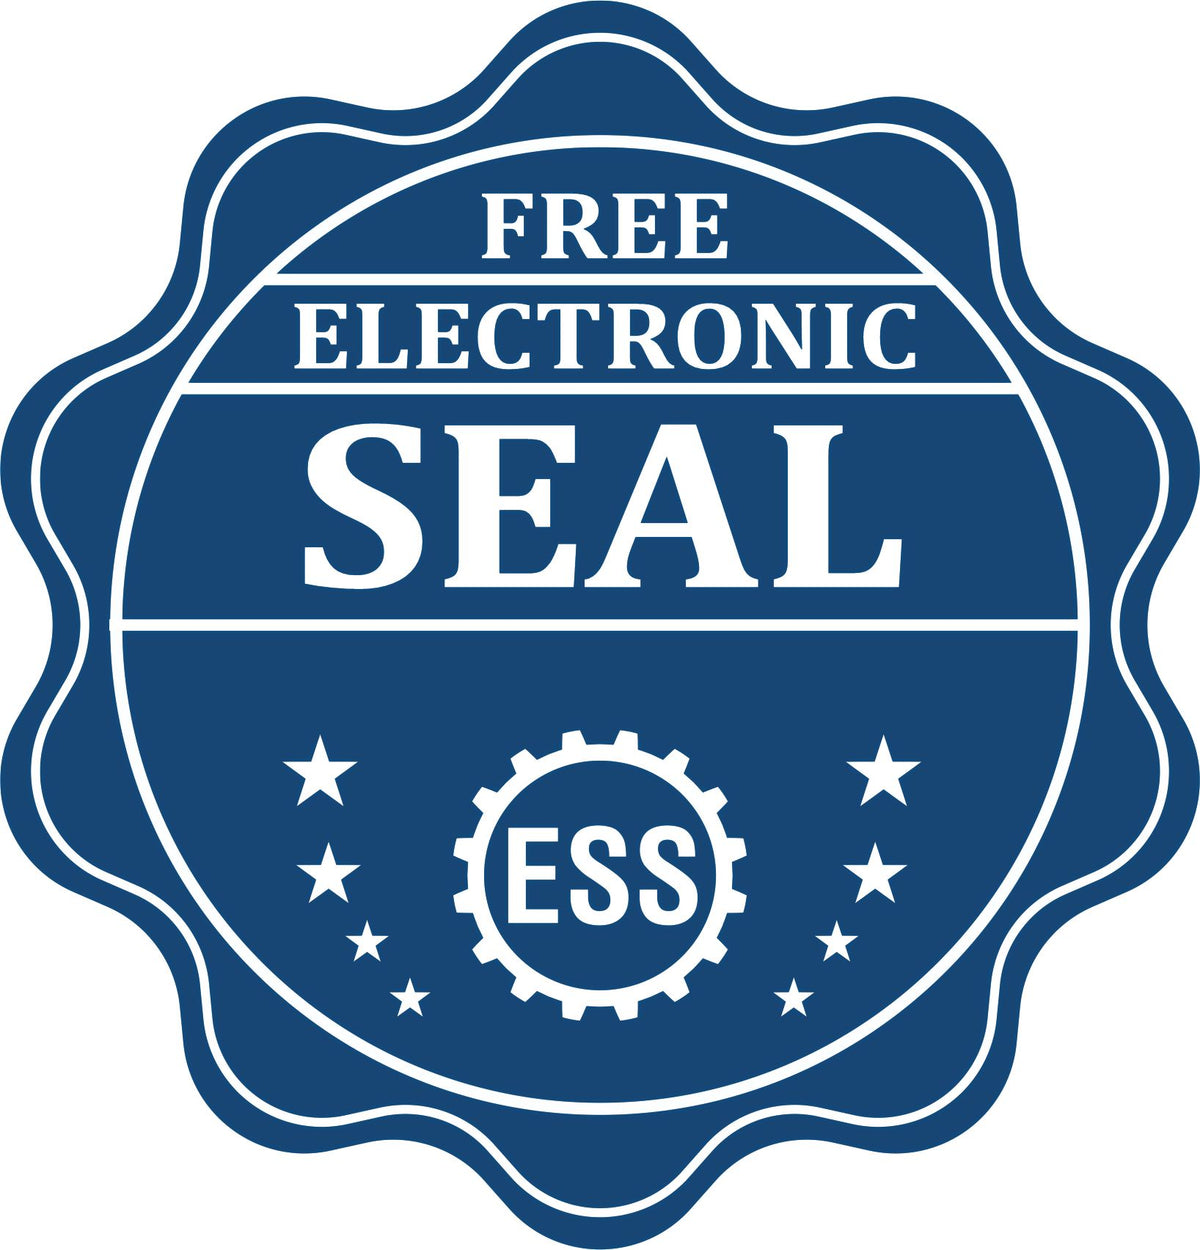 A badge showing a free electronic seal for the Long Reach New Hampshire PE Seal with stars and the ESS gear on the emblem.